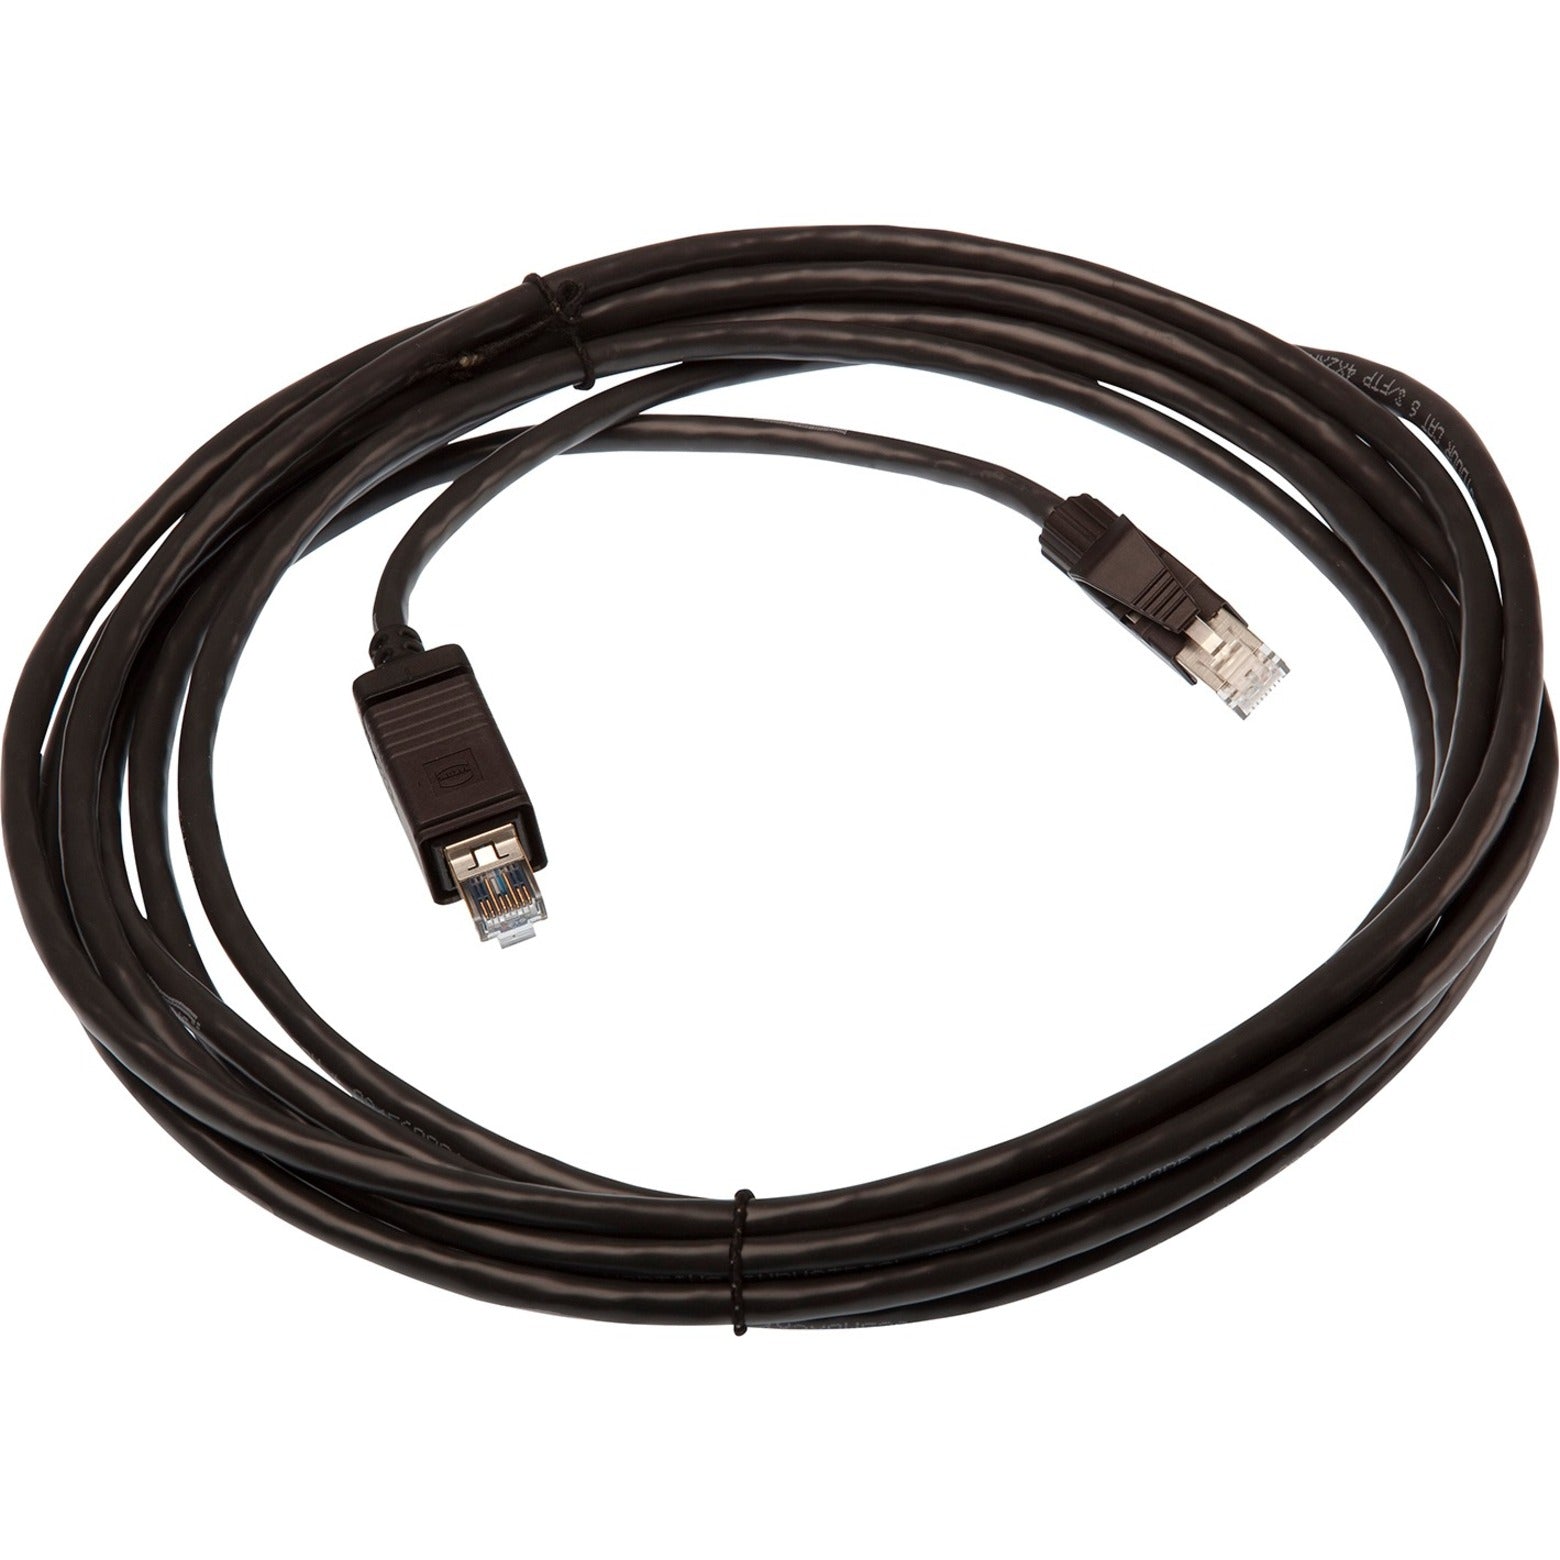 AXIS 5504-731 Outdoor RJ45 Cable, 49.21 ft, Push-Pull Tab, Category 6, Copper Conductor